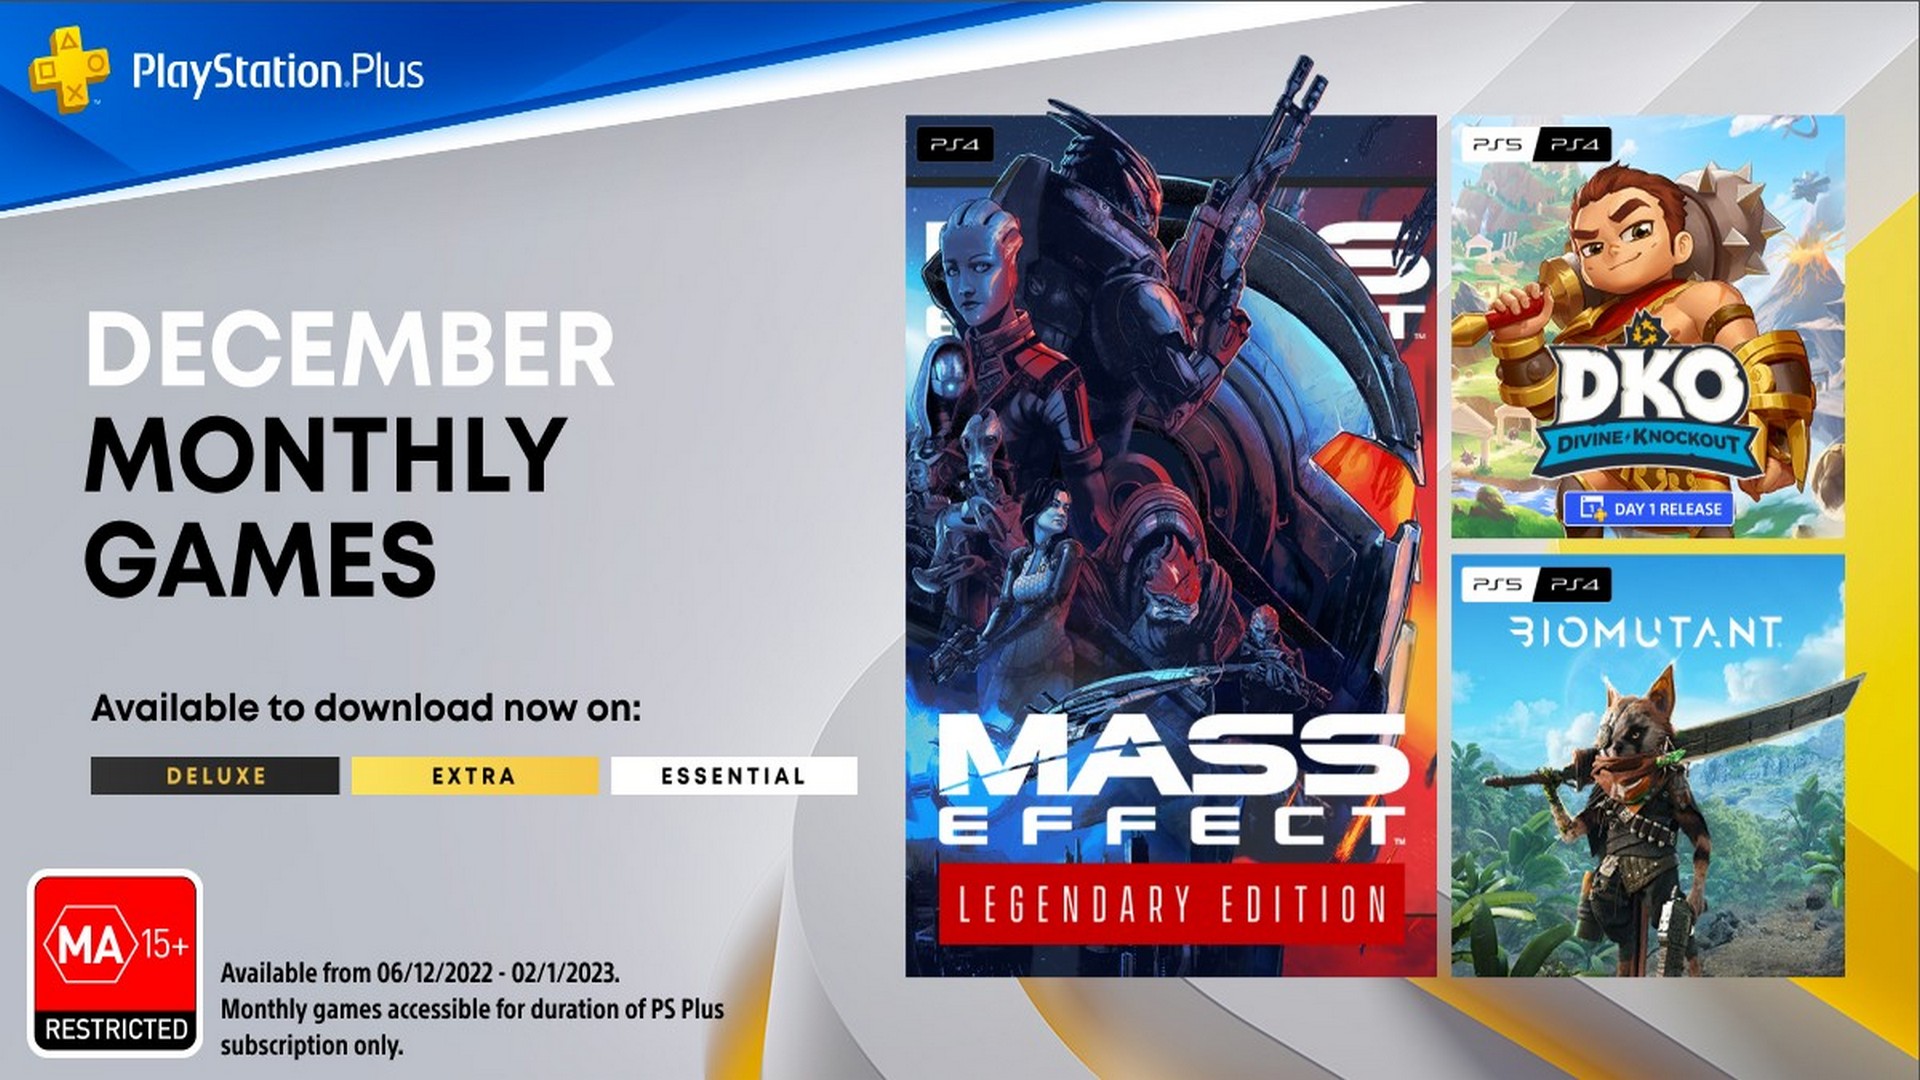 May Game Catalogue Lineup  PlayStation Plus Extra & Deluxe 